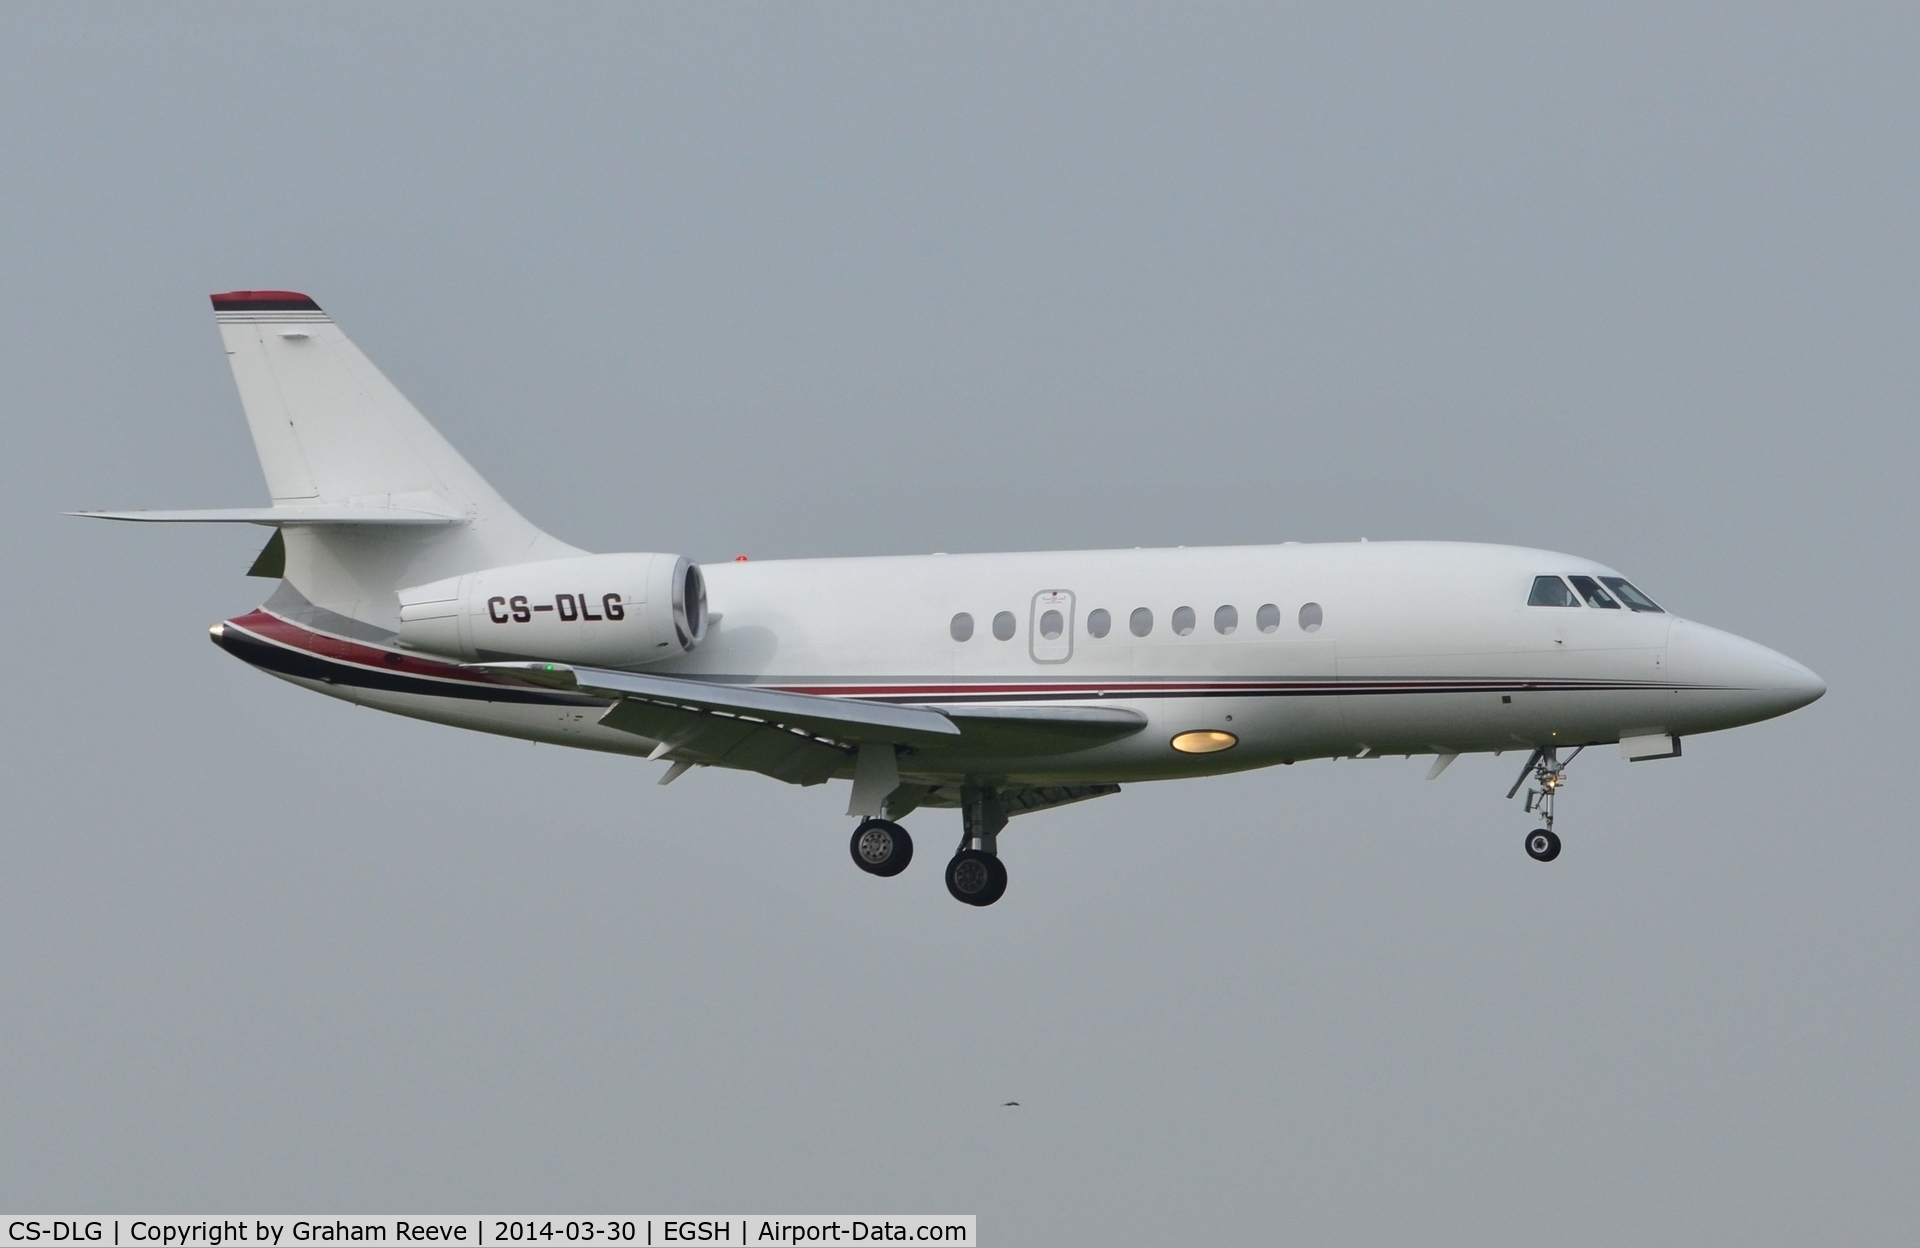 CS-DLG, 2008 Dassault Falcon 2000EX C/N 144, About to land at Norwich.